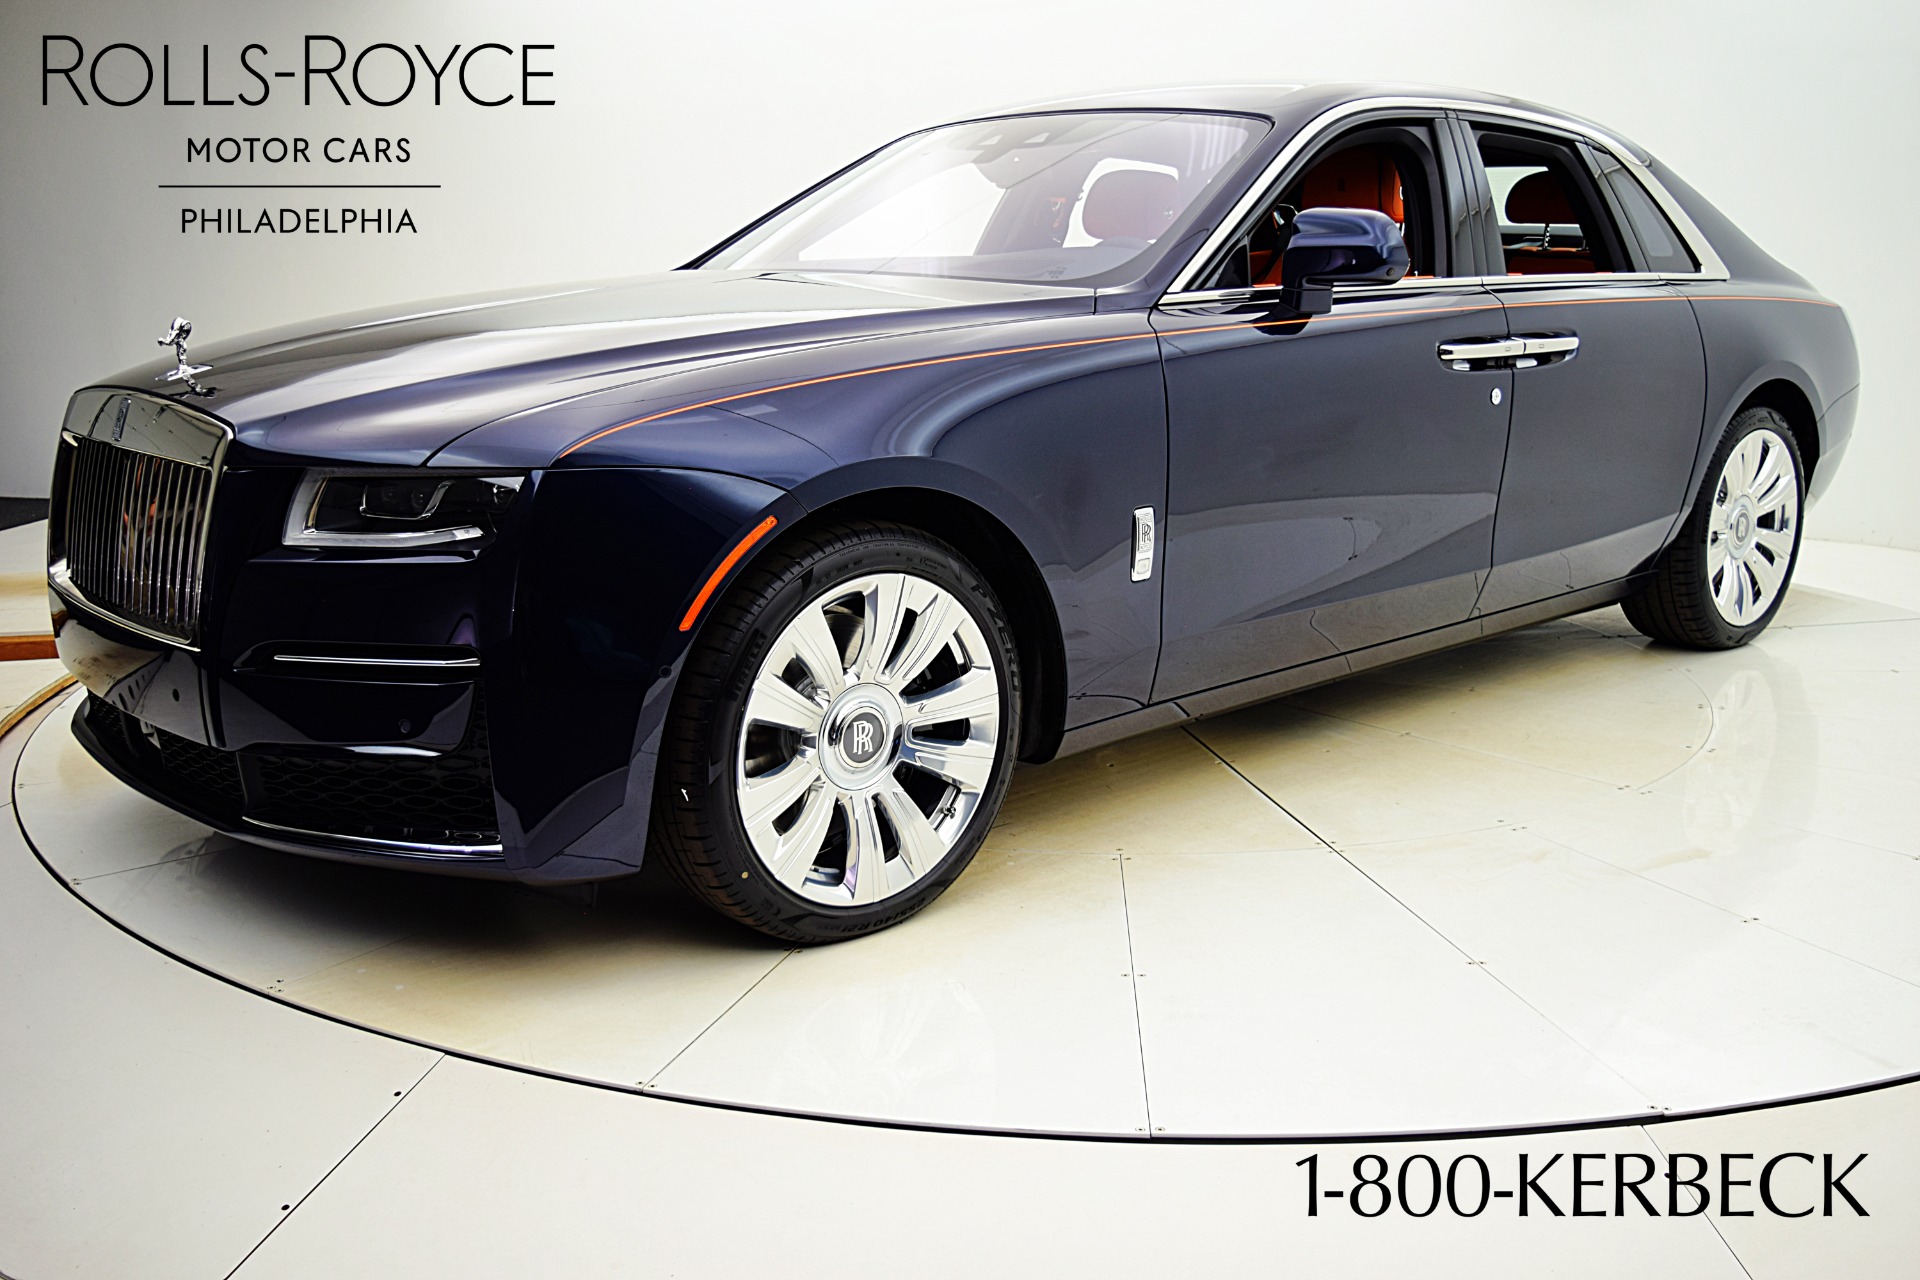 New Rolls-Royce Vehicles for Sale